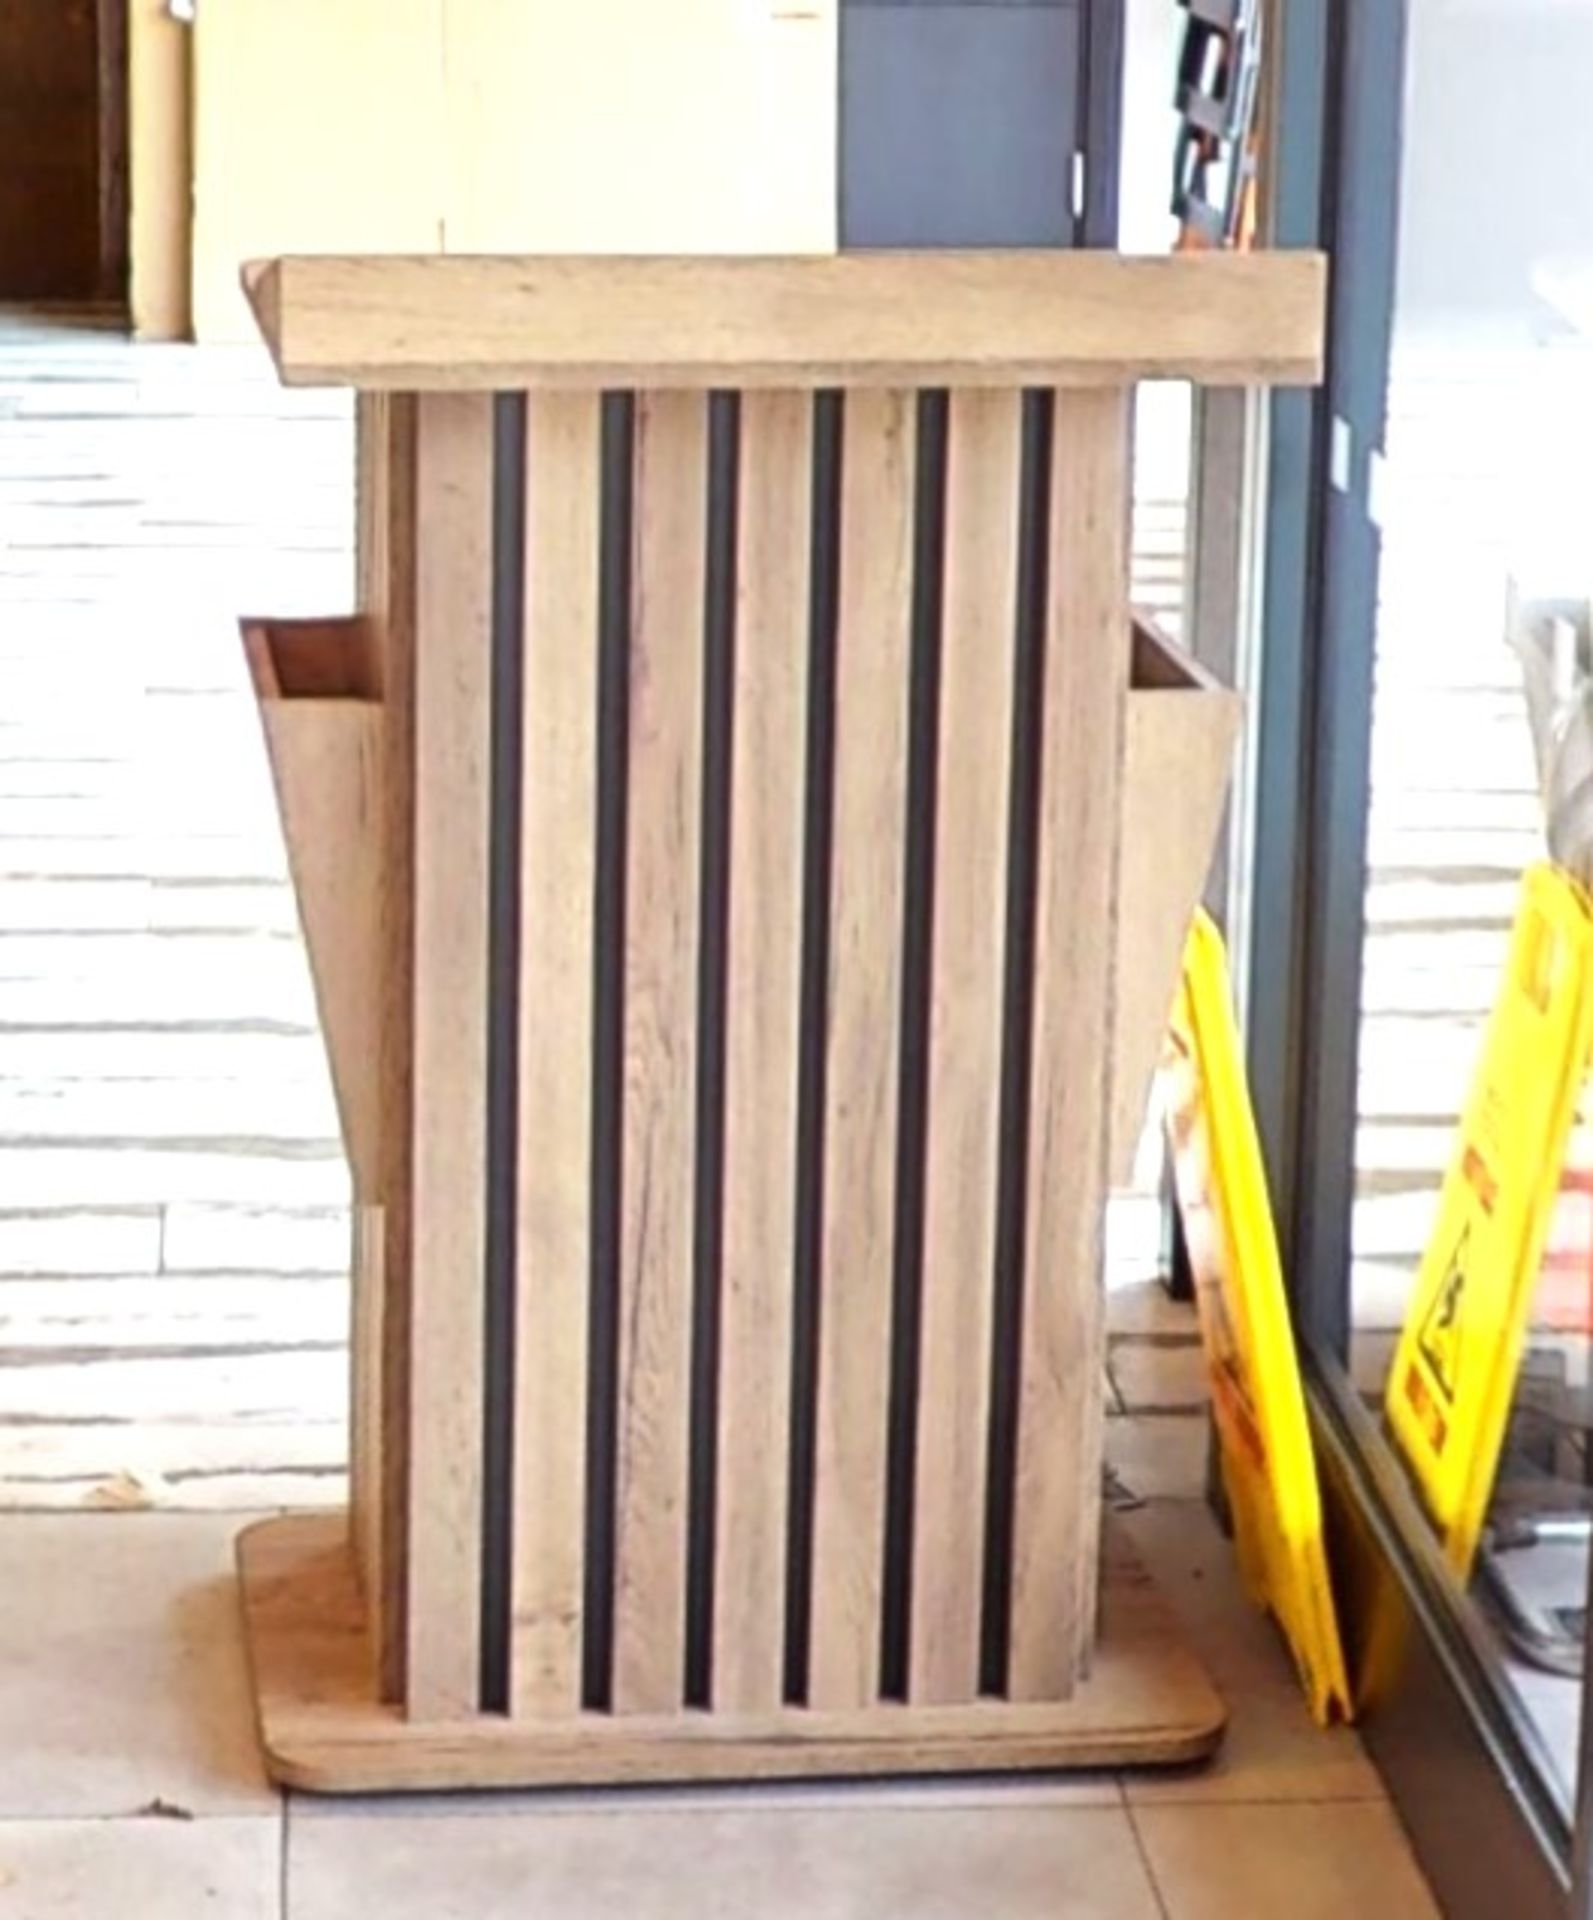 1 x Meet and Greet Restaurant Podium in Oak With Menu Holder - Image 4 of 5